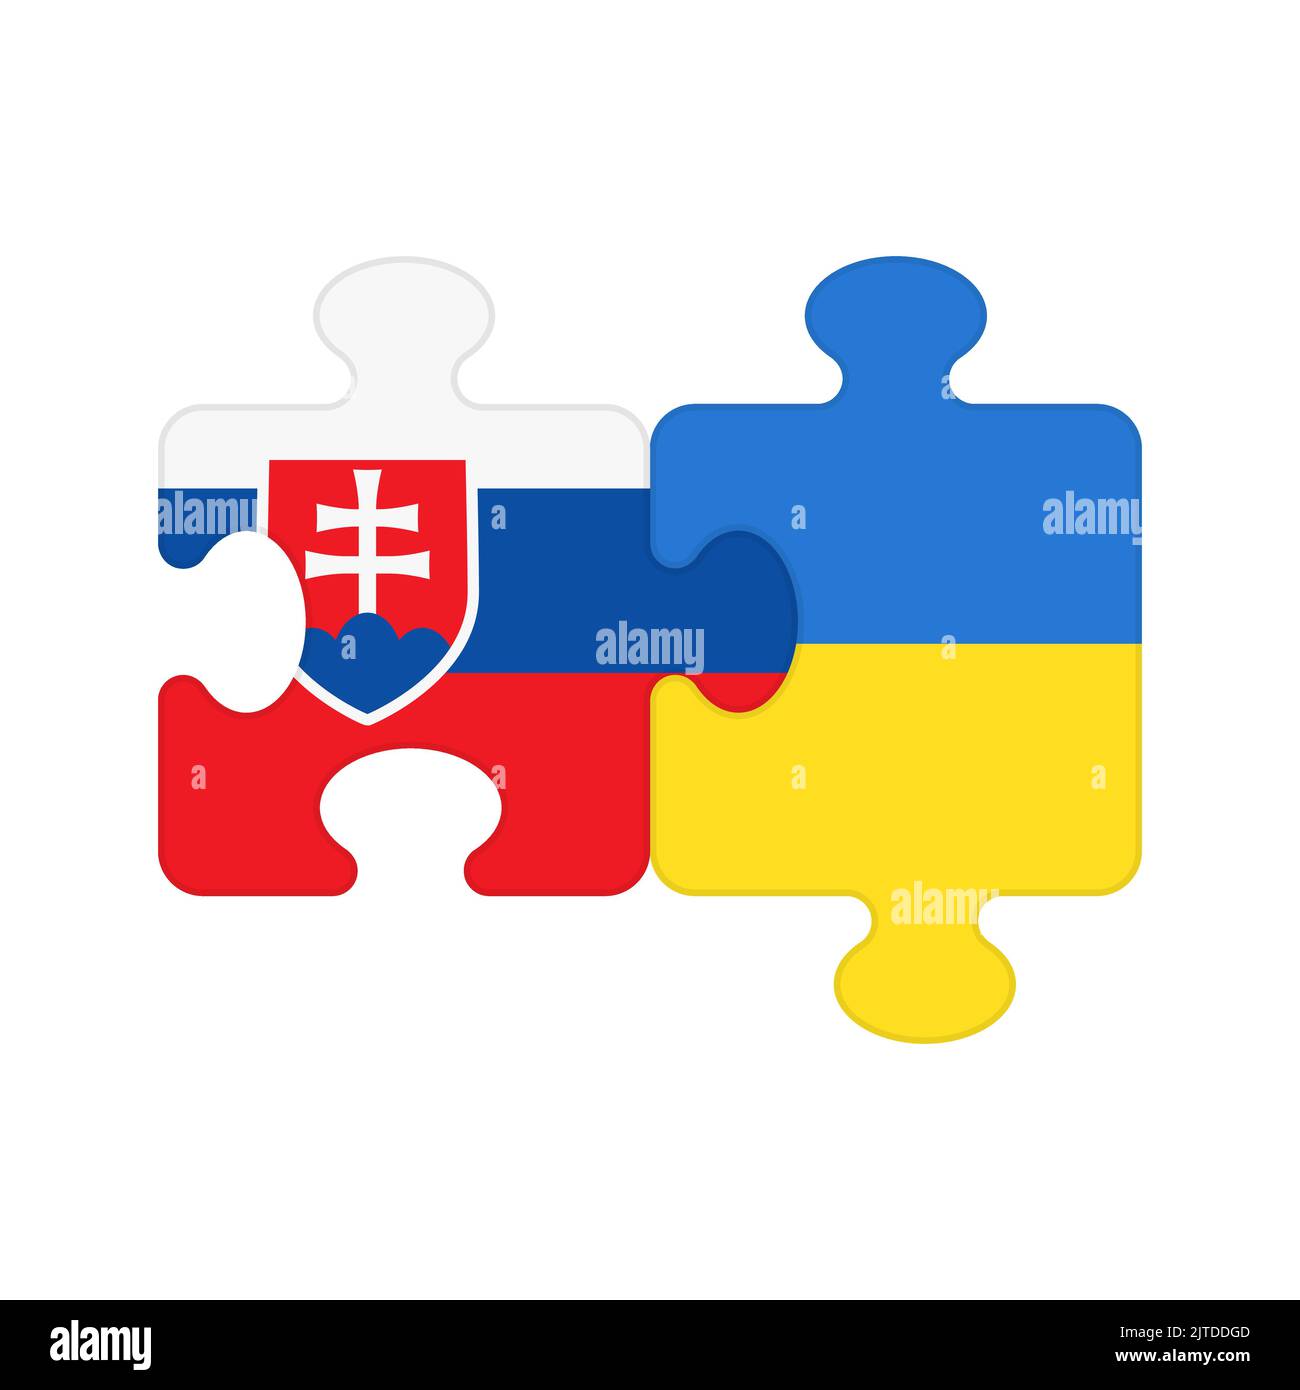 Puzzle pieces with flags of Slovakia and Ukraine. Parts with national symbols of European countries joining together in cooperation, friendship and dialogue between two partners Bratislava and Kyiv Stock Vector